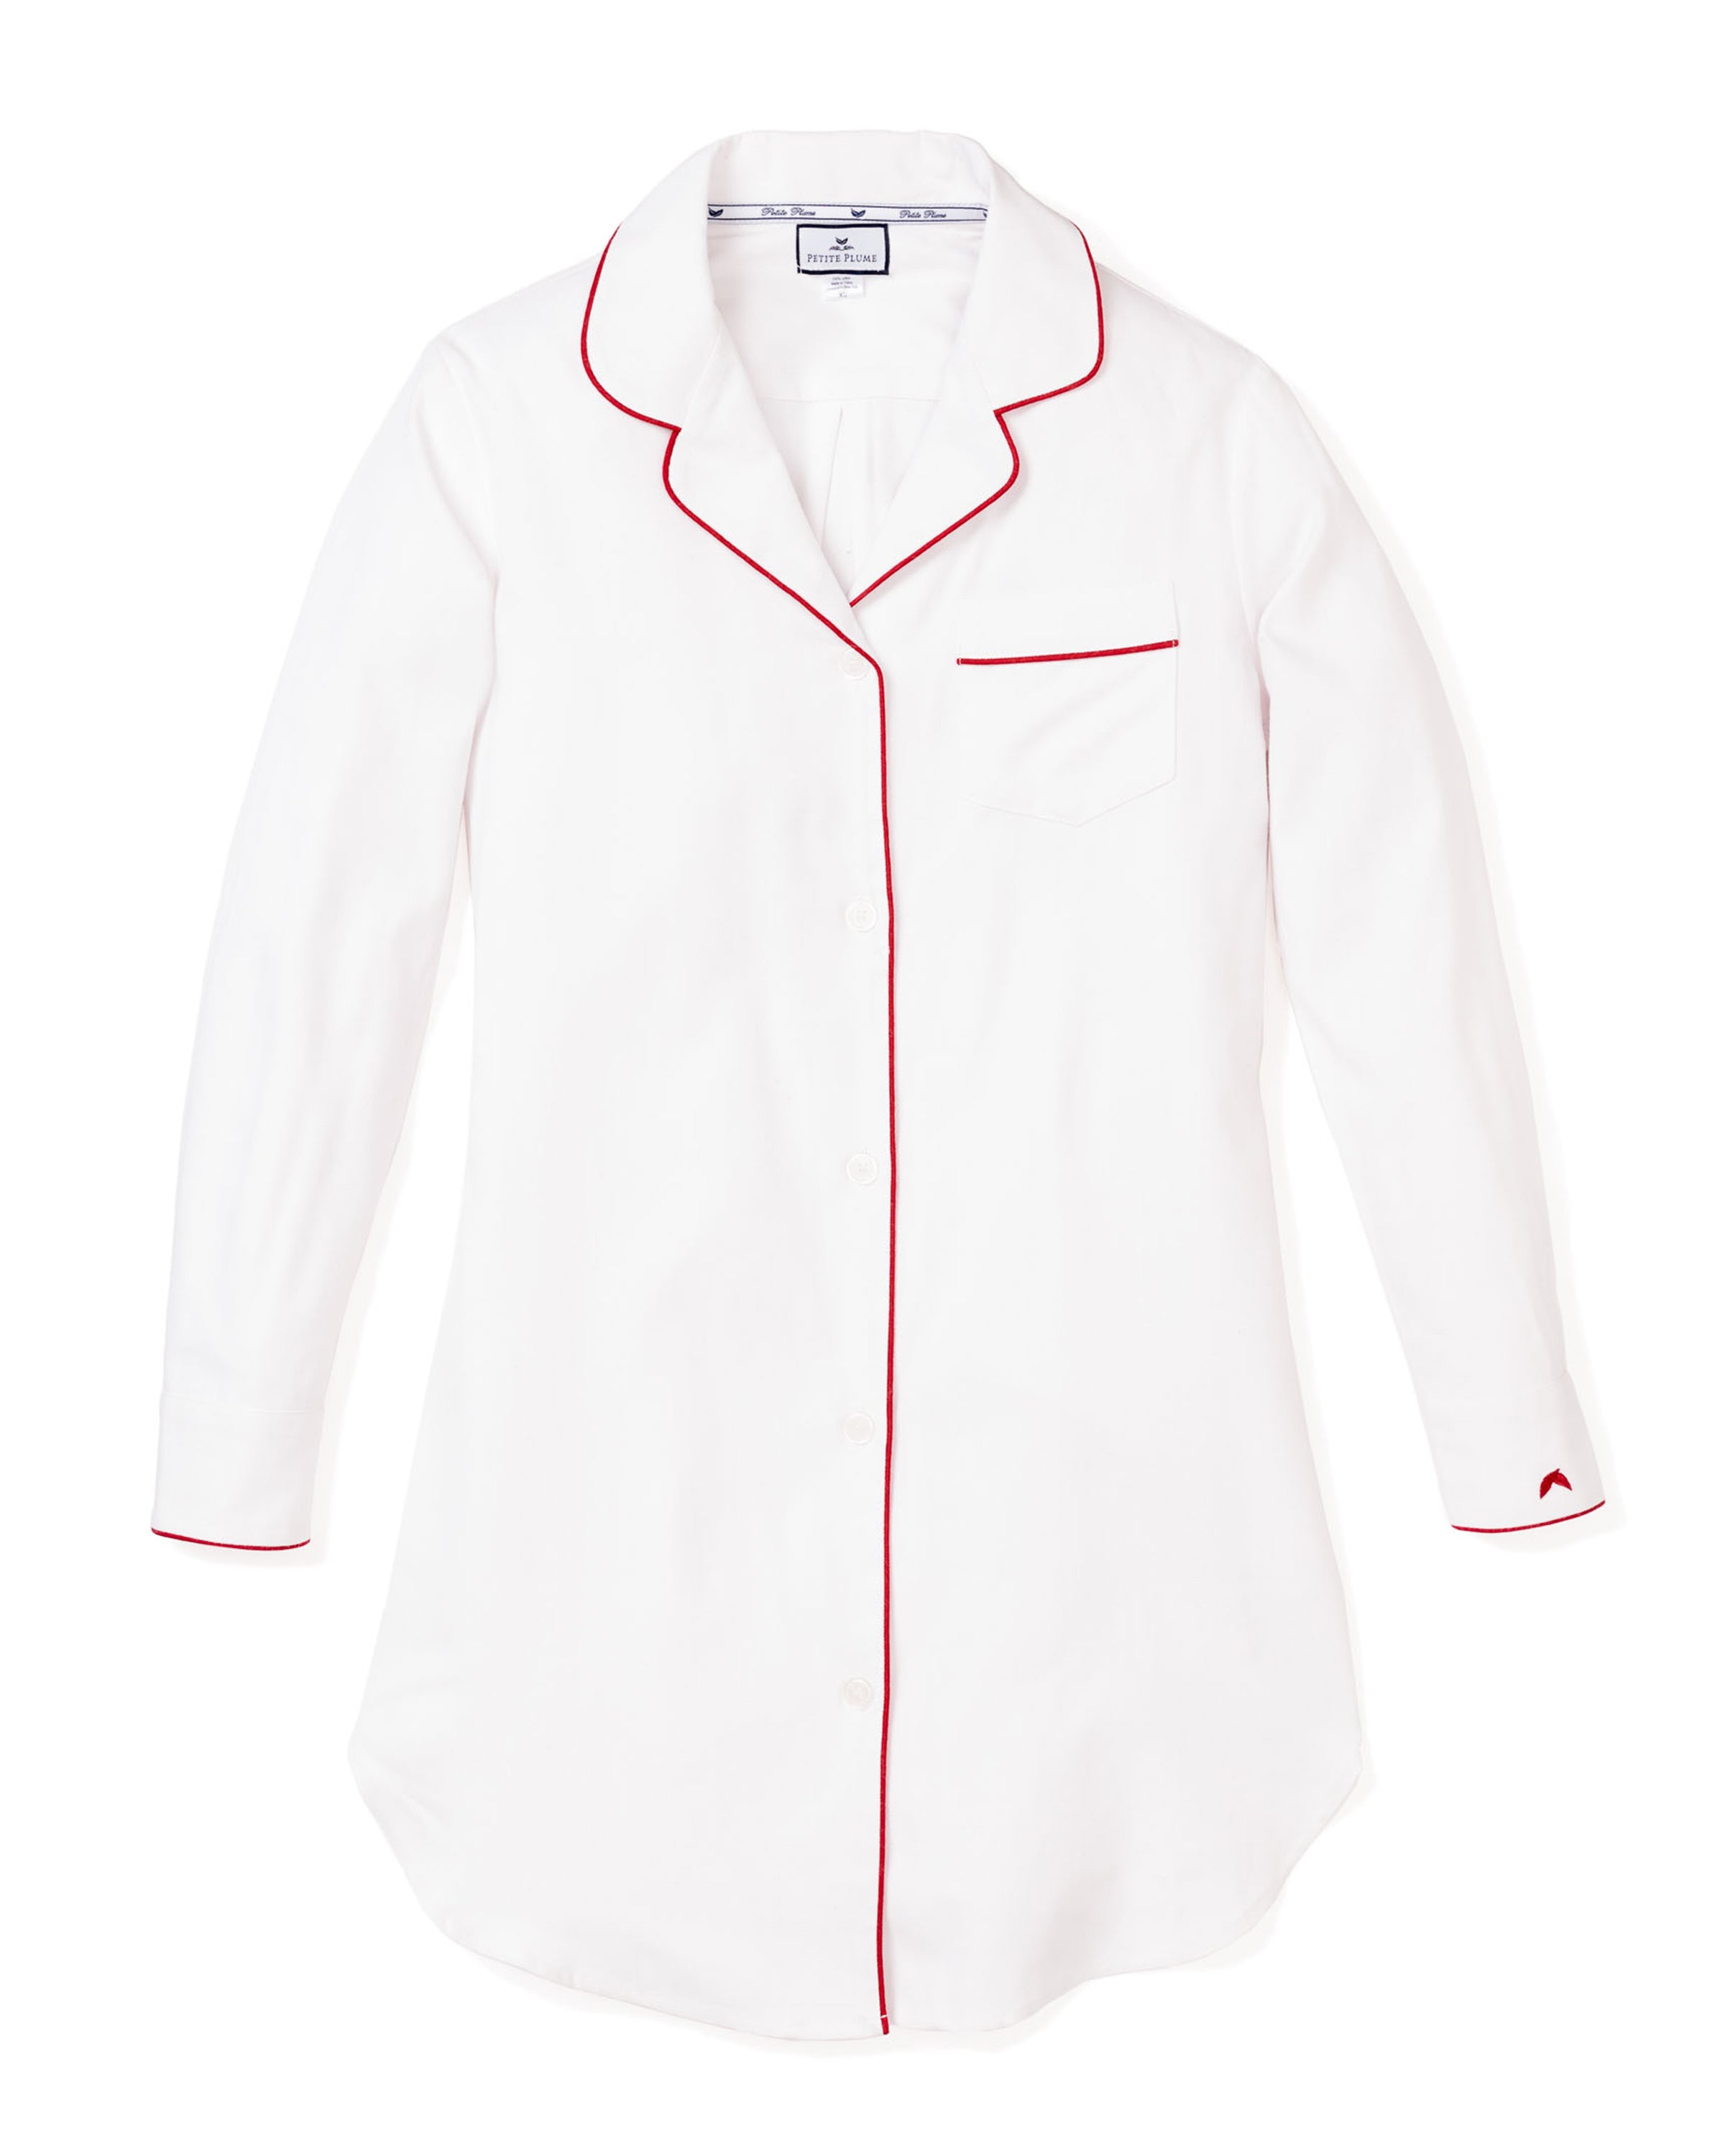 Women's Twill Nightshirt in White with Red Piping